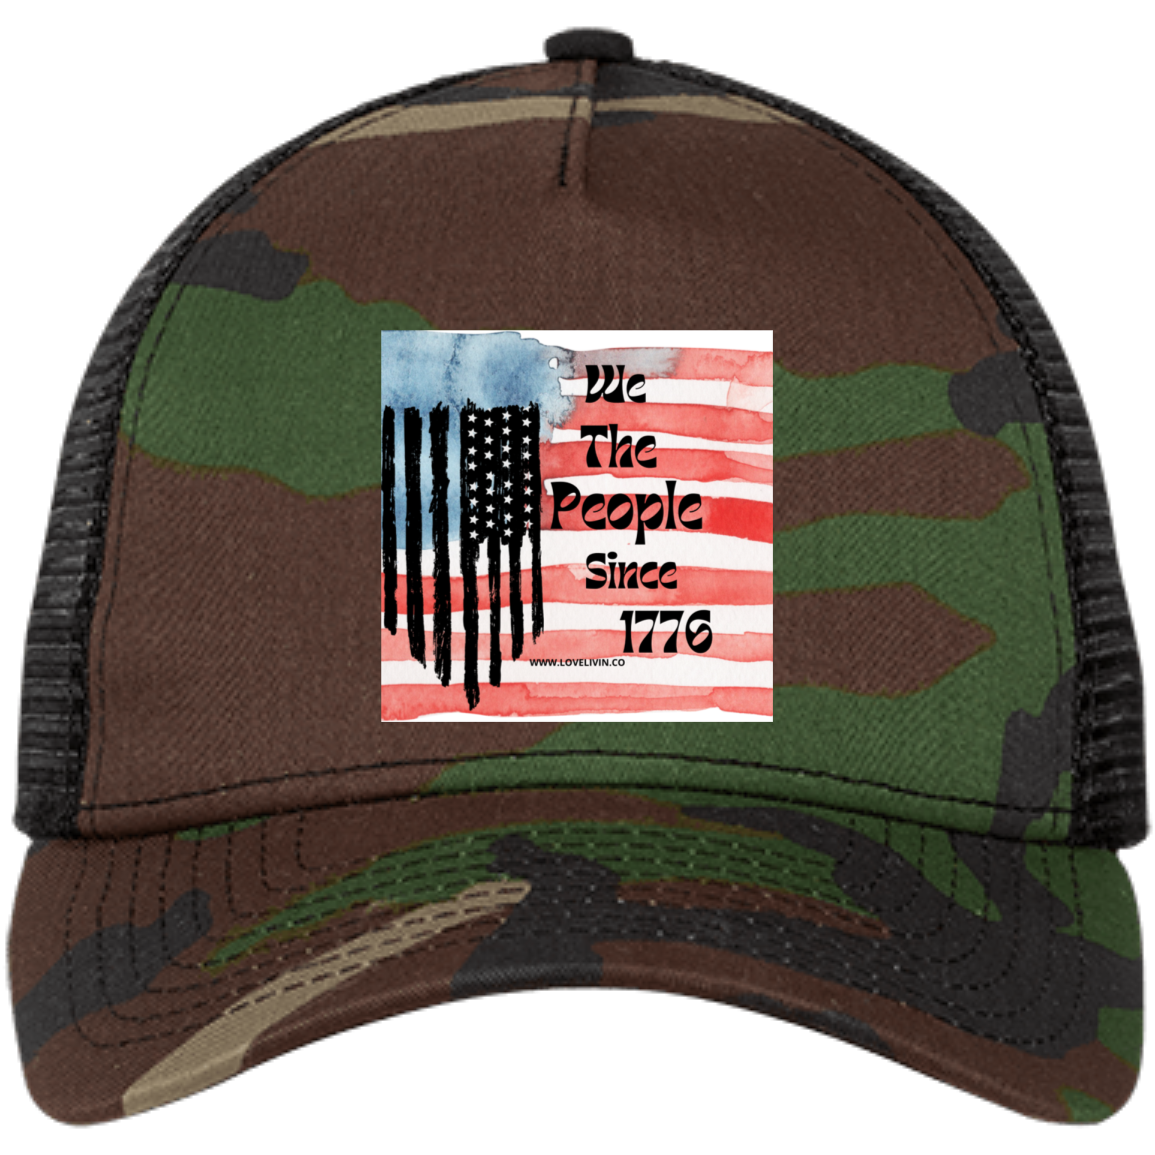 WE THE PEOPLE SINCE 1776 (1) NE205 Embroidered Snapback Trucker Cap